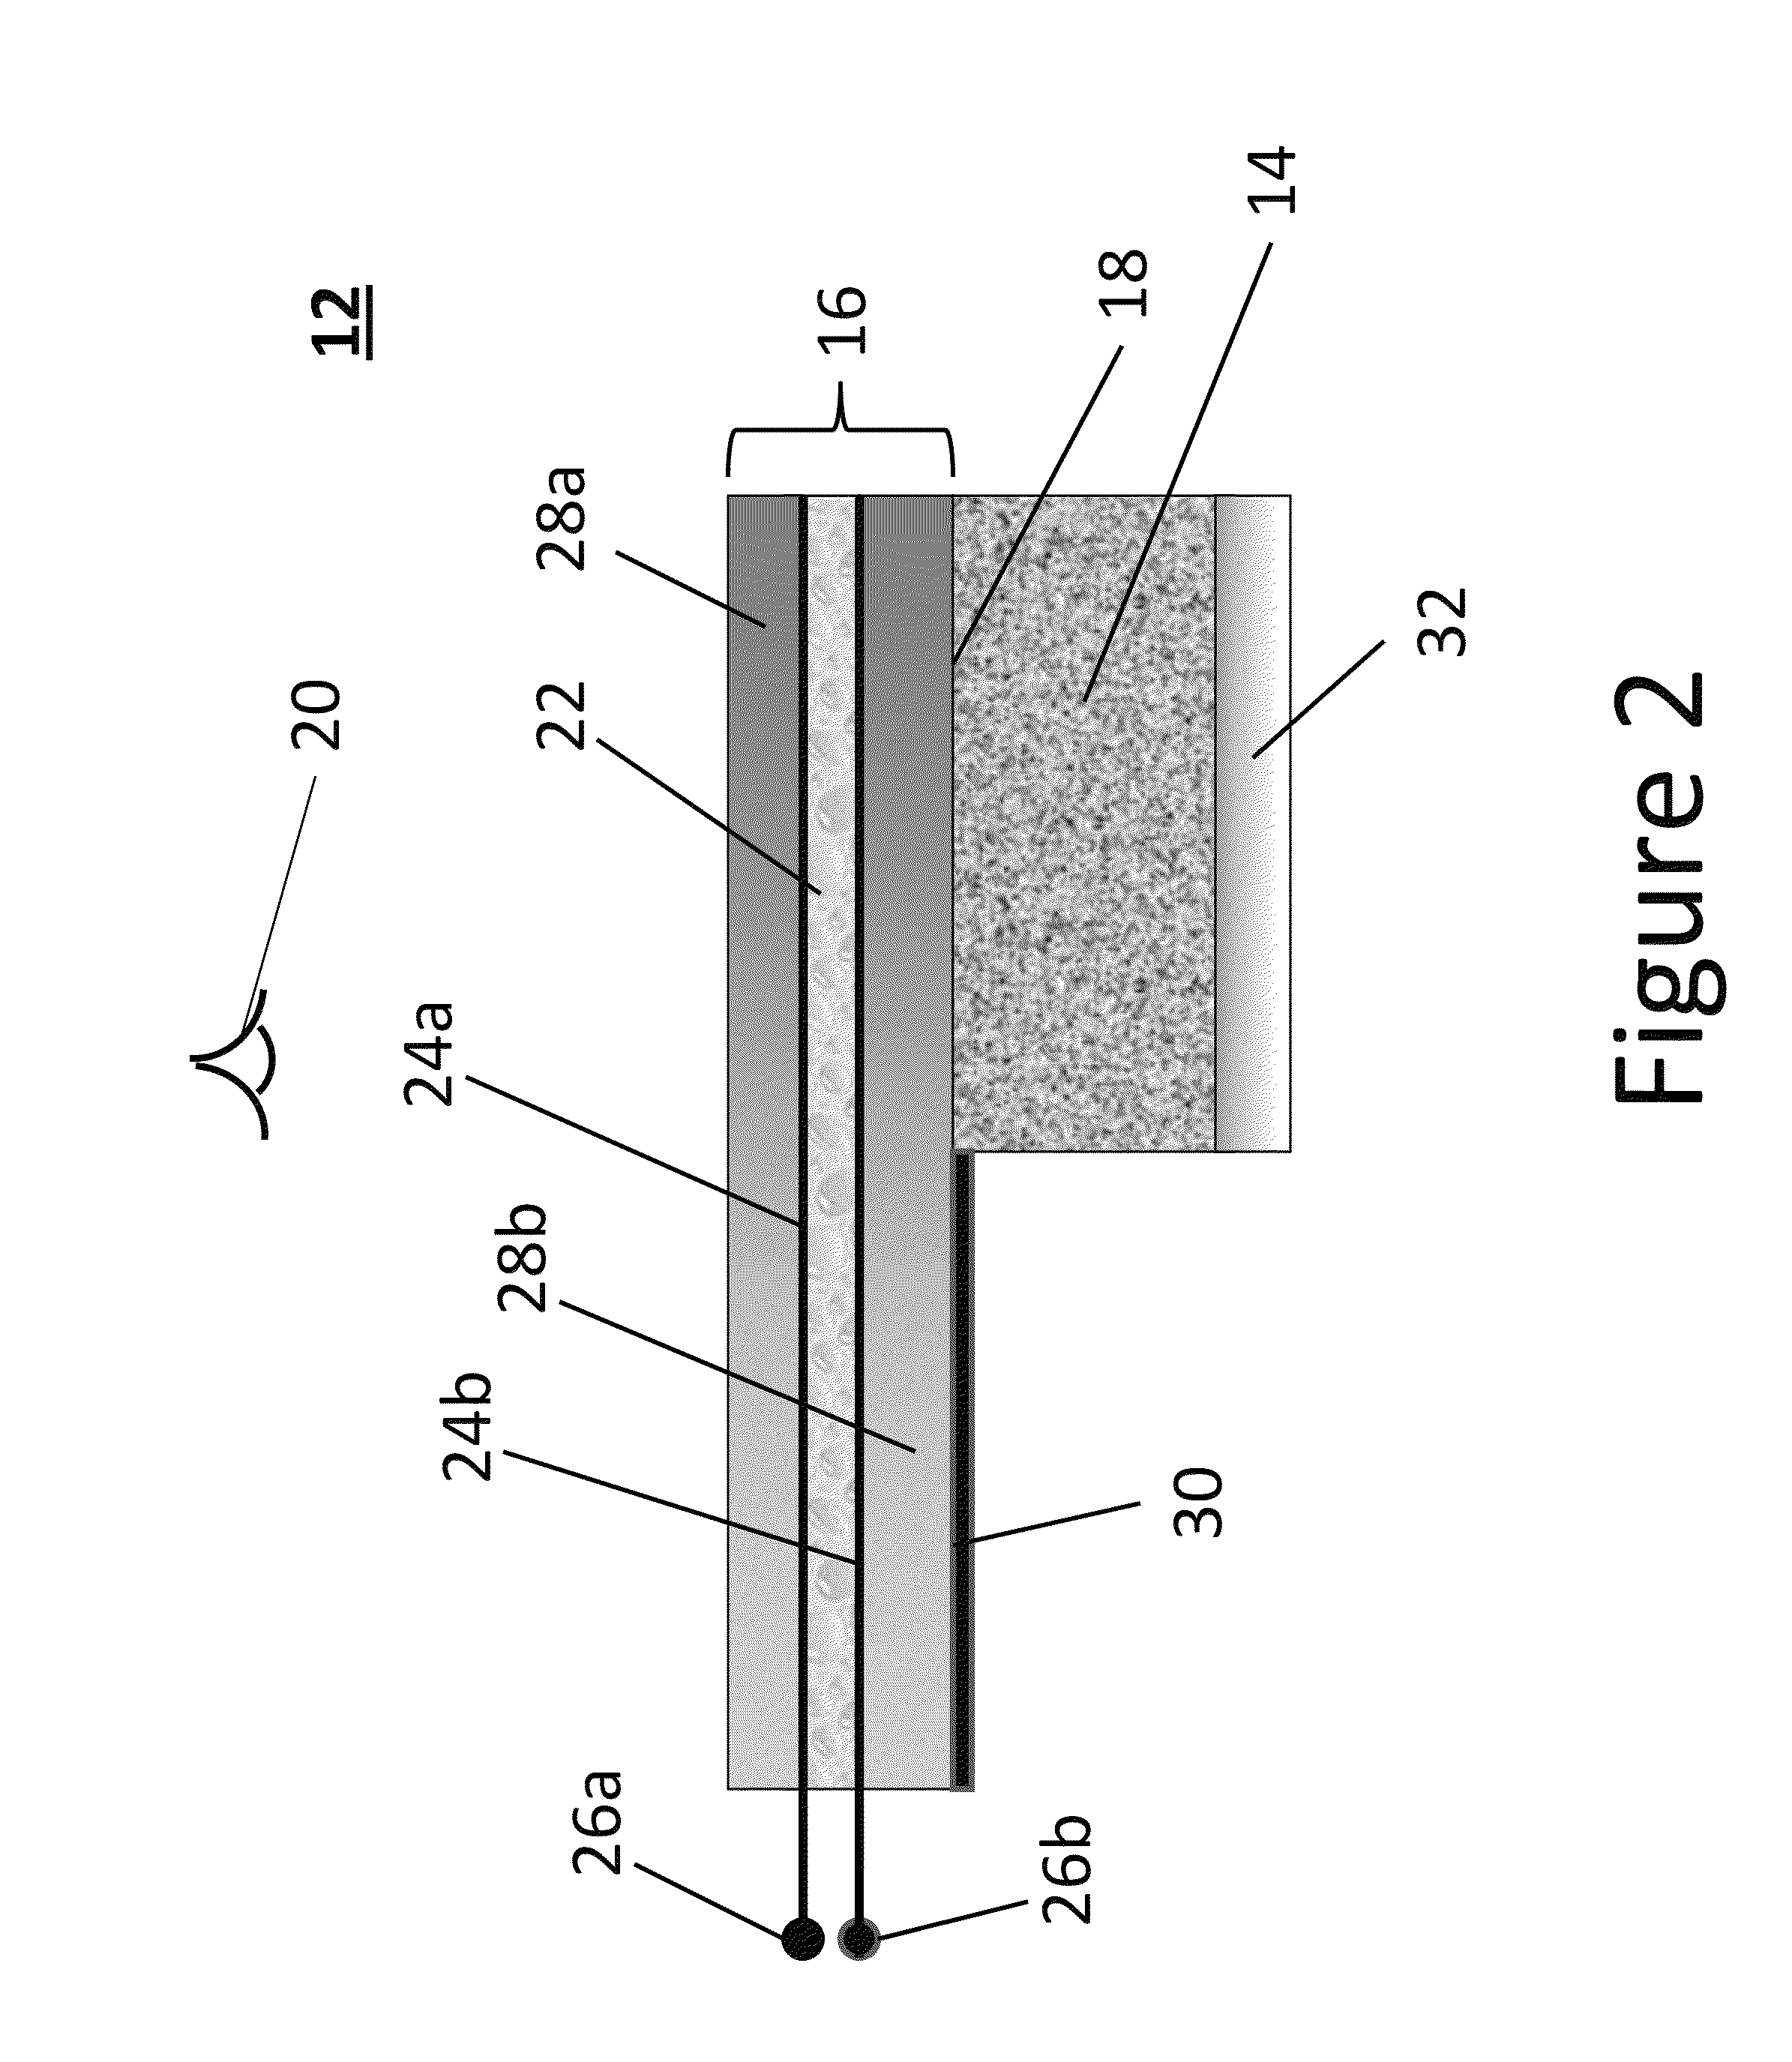 Display with overlayed electronic skin